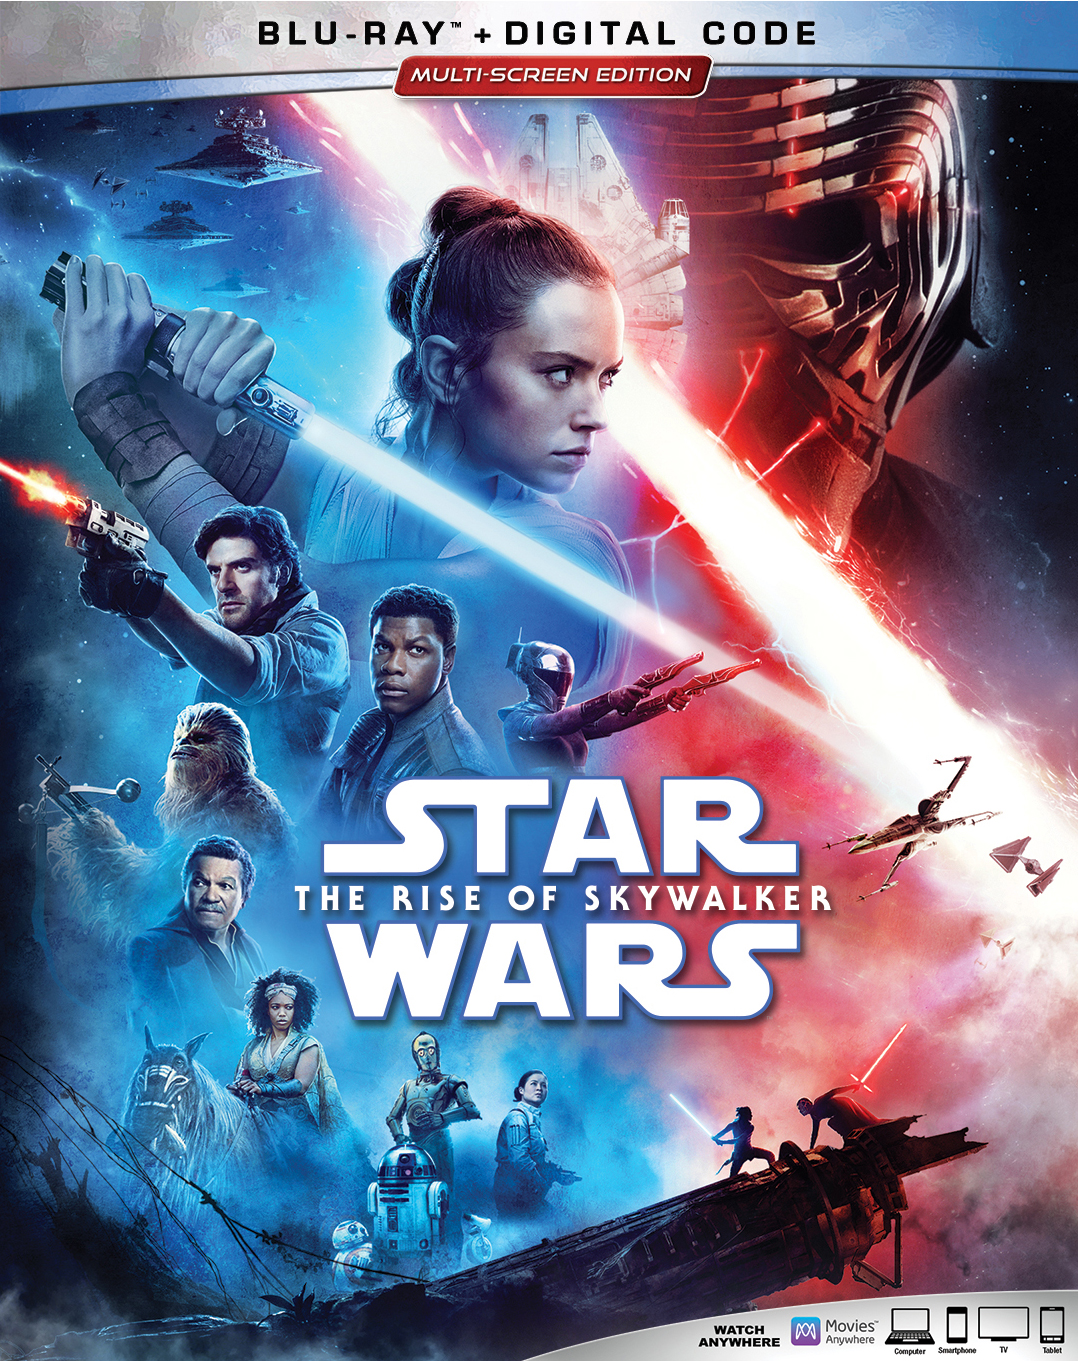 Star Wars: The Rise of Skywalker (Episode IX) (2019) 720p HEVC BluRay Hollywood Movie ORG. [Dual Audio] [Hindi or English] x265 AAC ESubs [950MB]